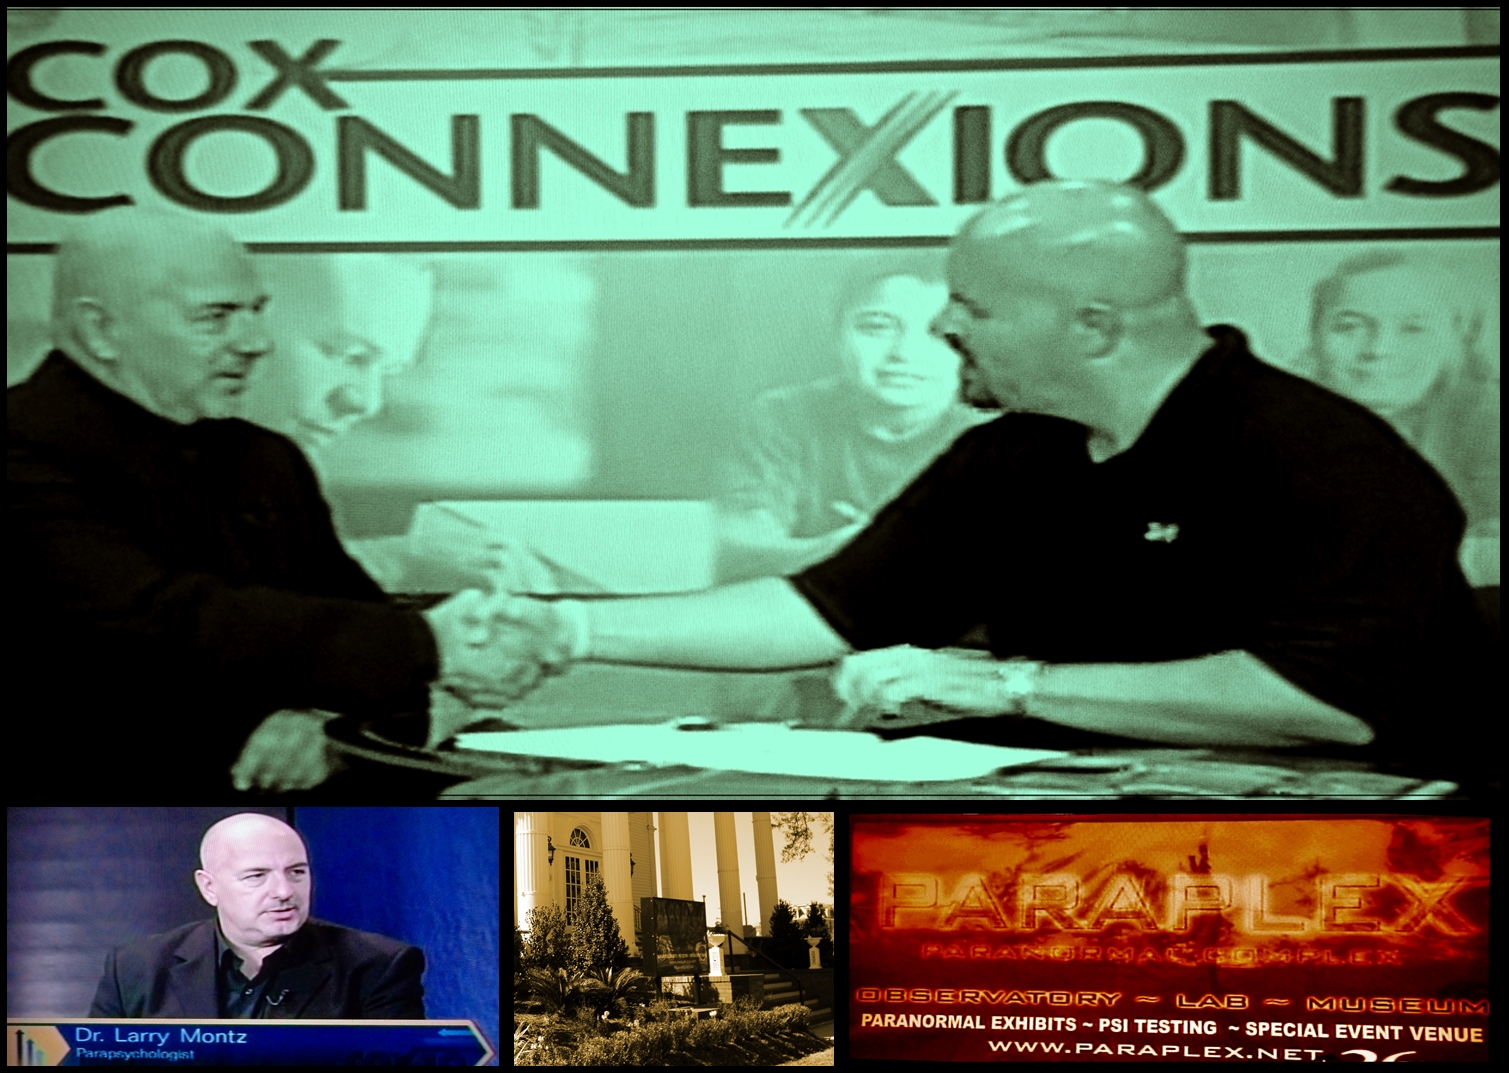 Larry Montz on parapsychology and his PARAPLEX (World's 1st 24/7 Paranormal Observatory, Lab & Museum) on Cox Connexions (2007, 2008, 2009) with Brad Grundmeyer,former Director of Public, Government and Regulatory Affairs, Cox Communications.